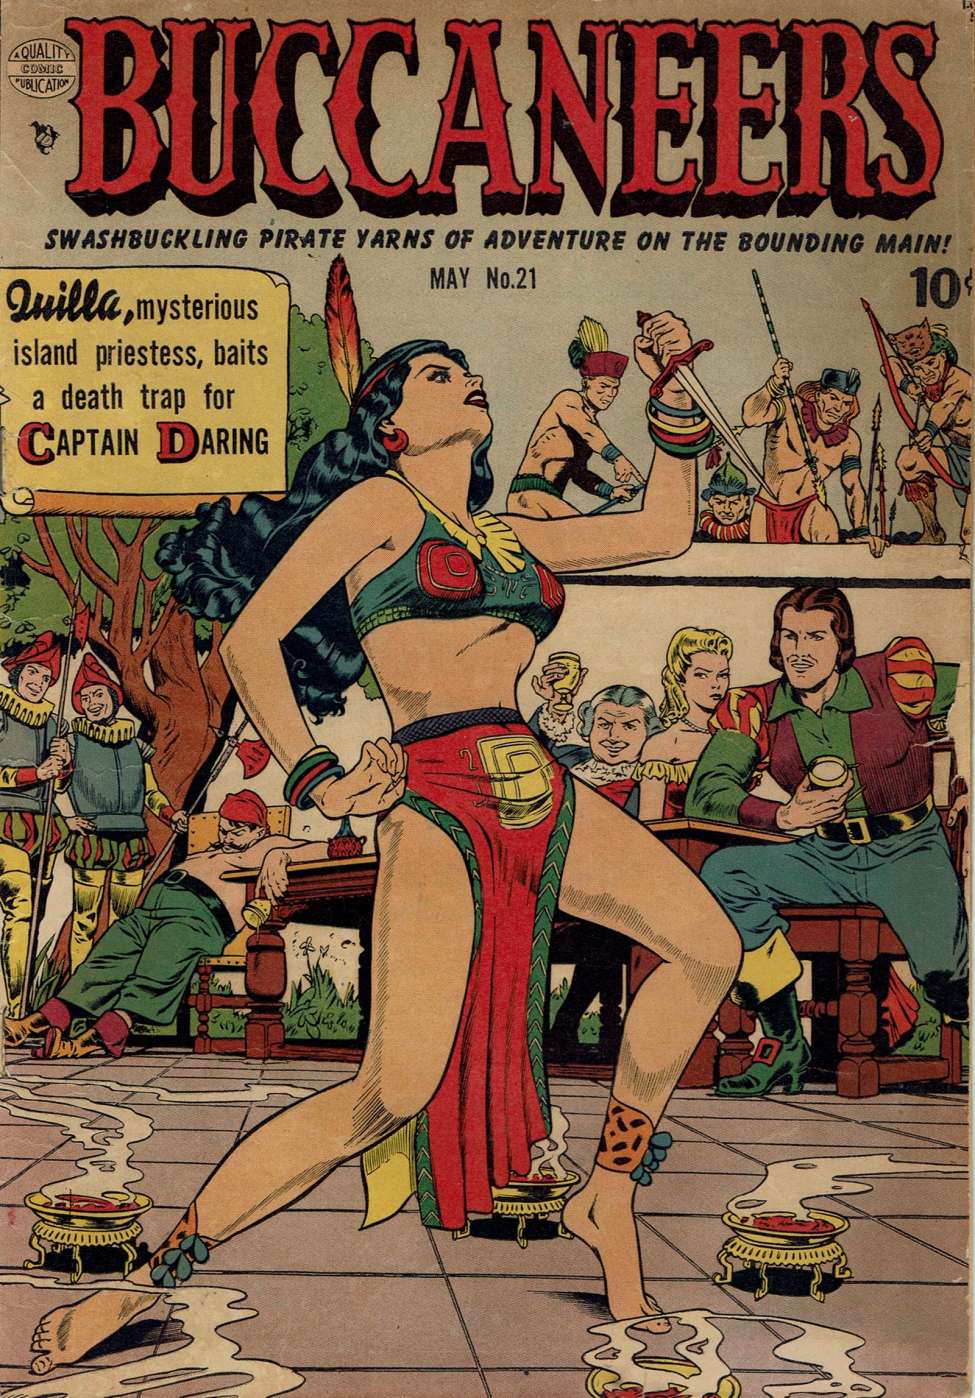 Comic Book Cover For Buccaneers 21 - Version 1